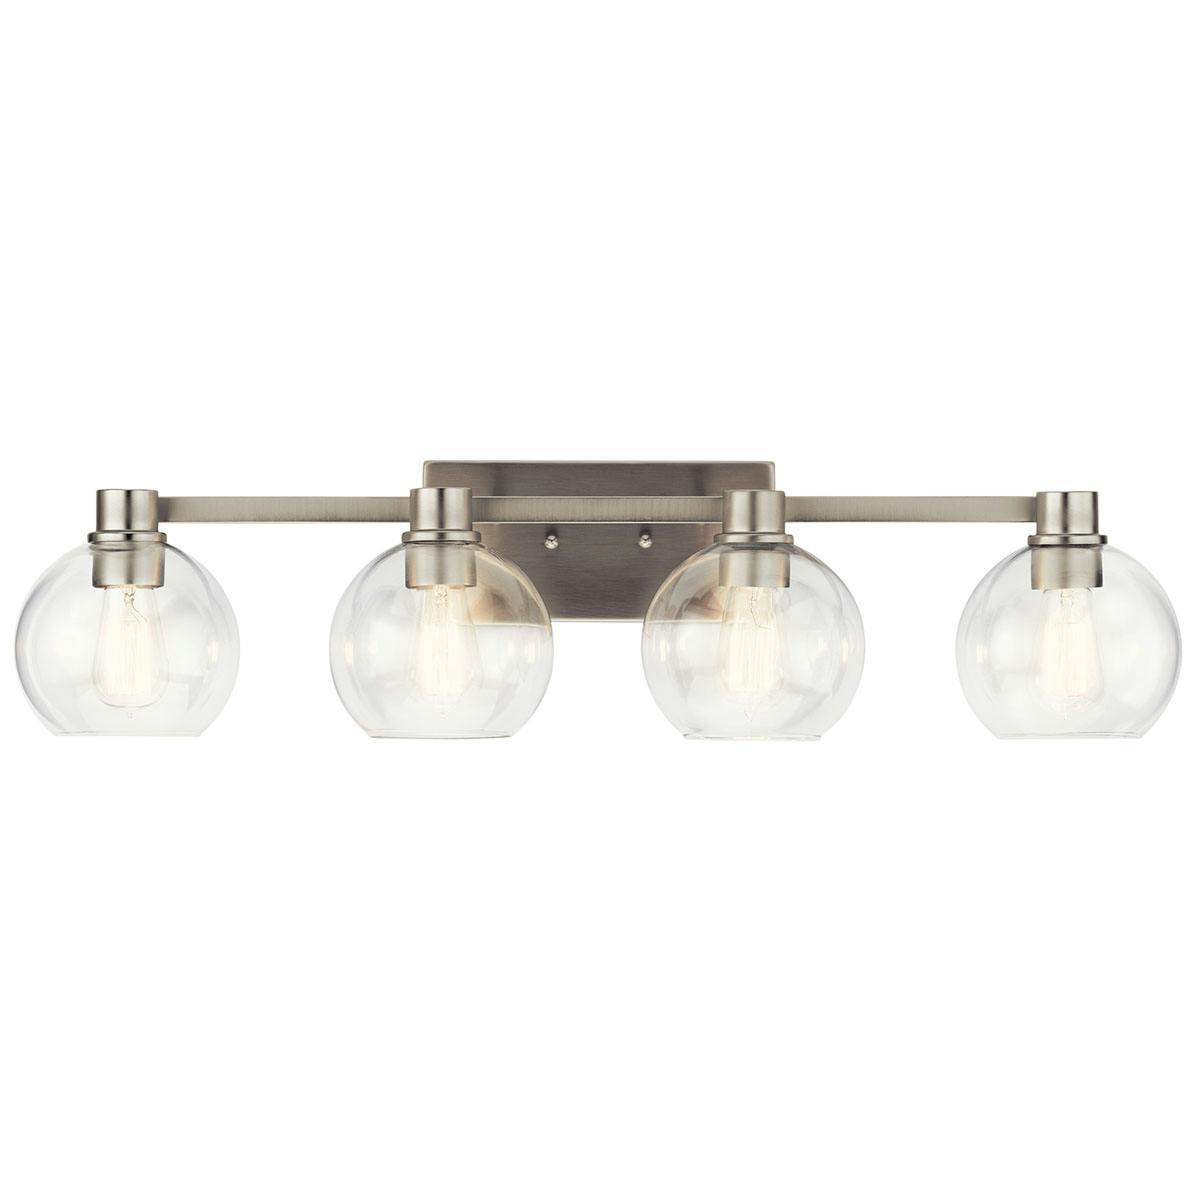 The Harmony 4 Light Vanity Light Nickel facing down on a white background